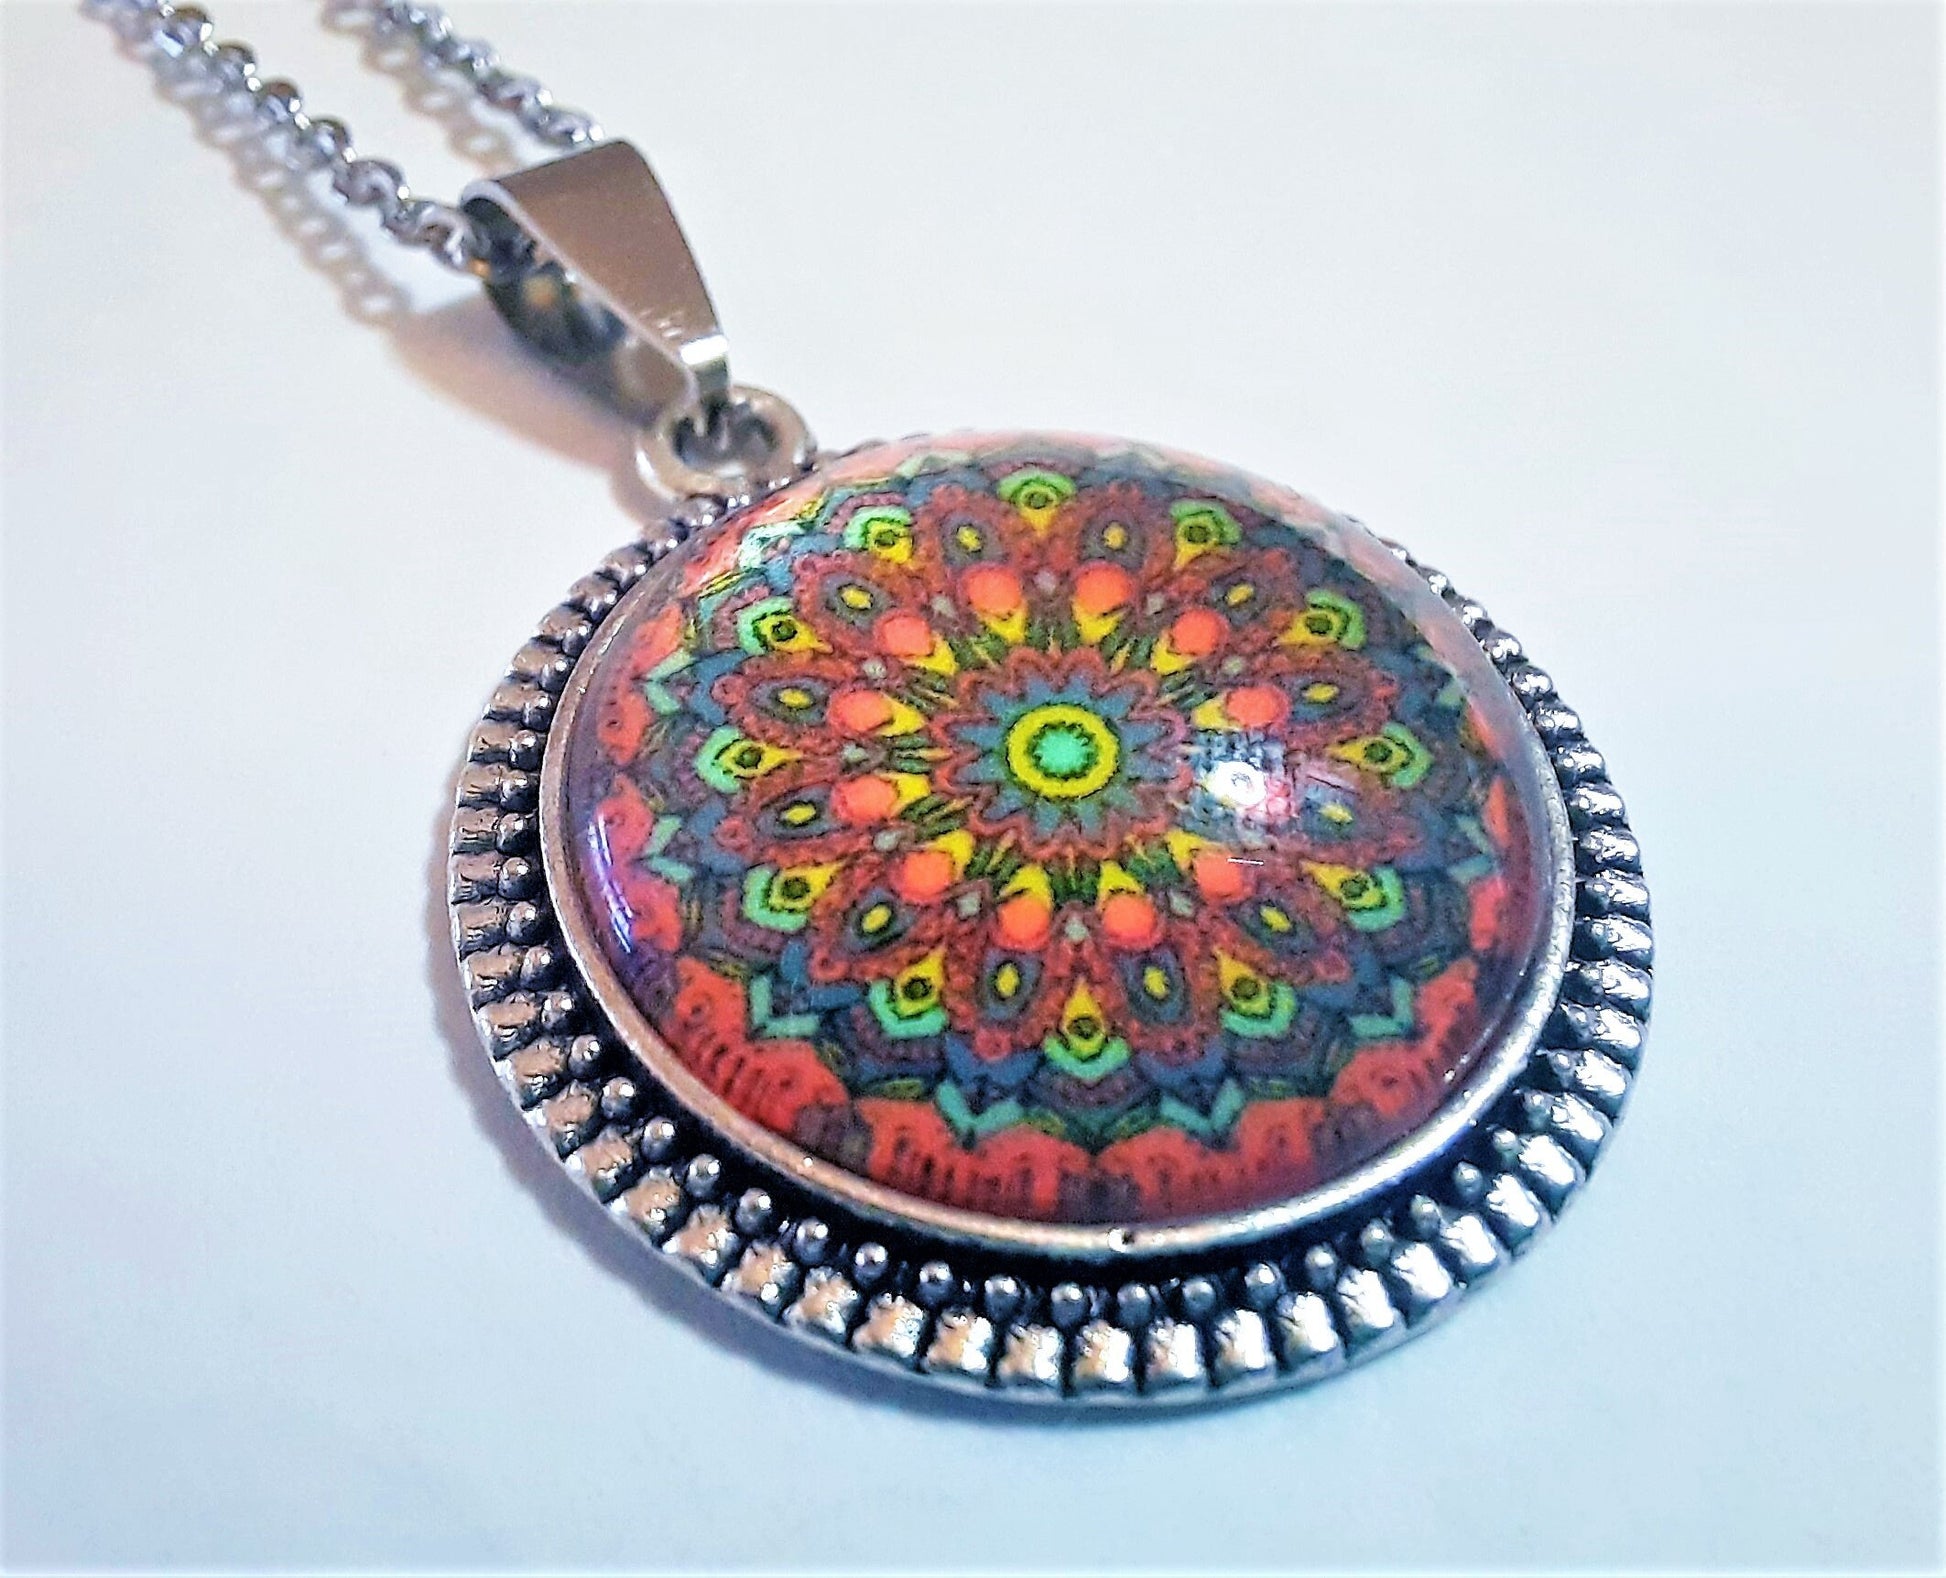 Handcrafted Red and Yellow Mandala Pattern Design - Glass Cabochon - Tibetan Style Stainless Steel Pendant Necklace - Hypoallergenic